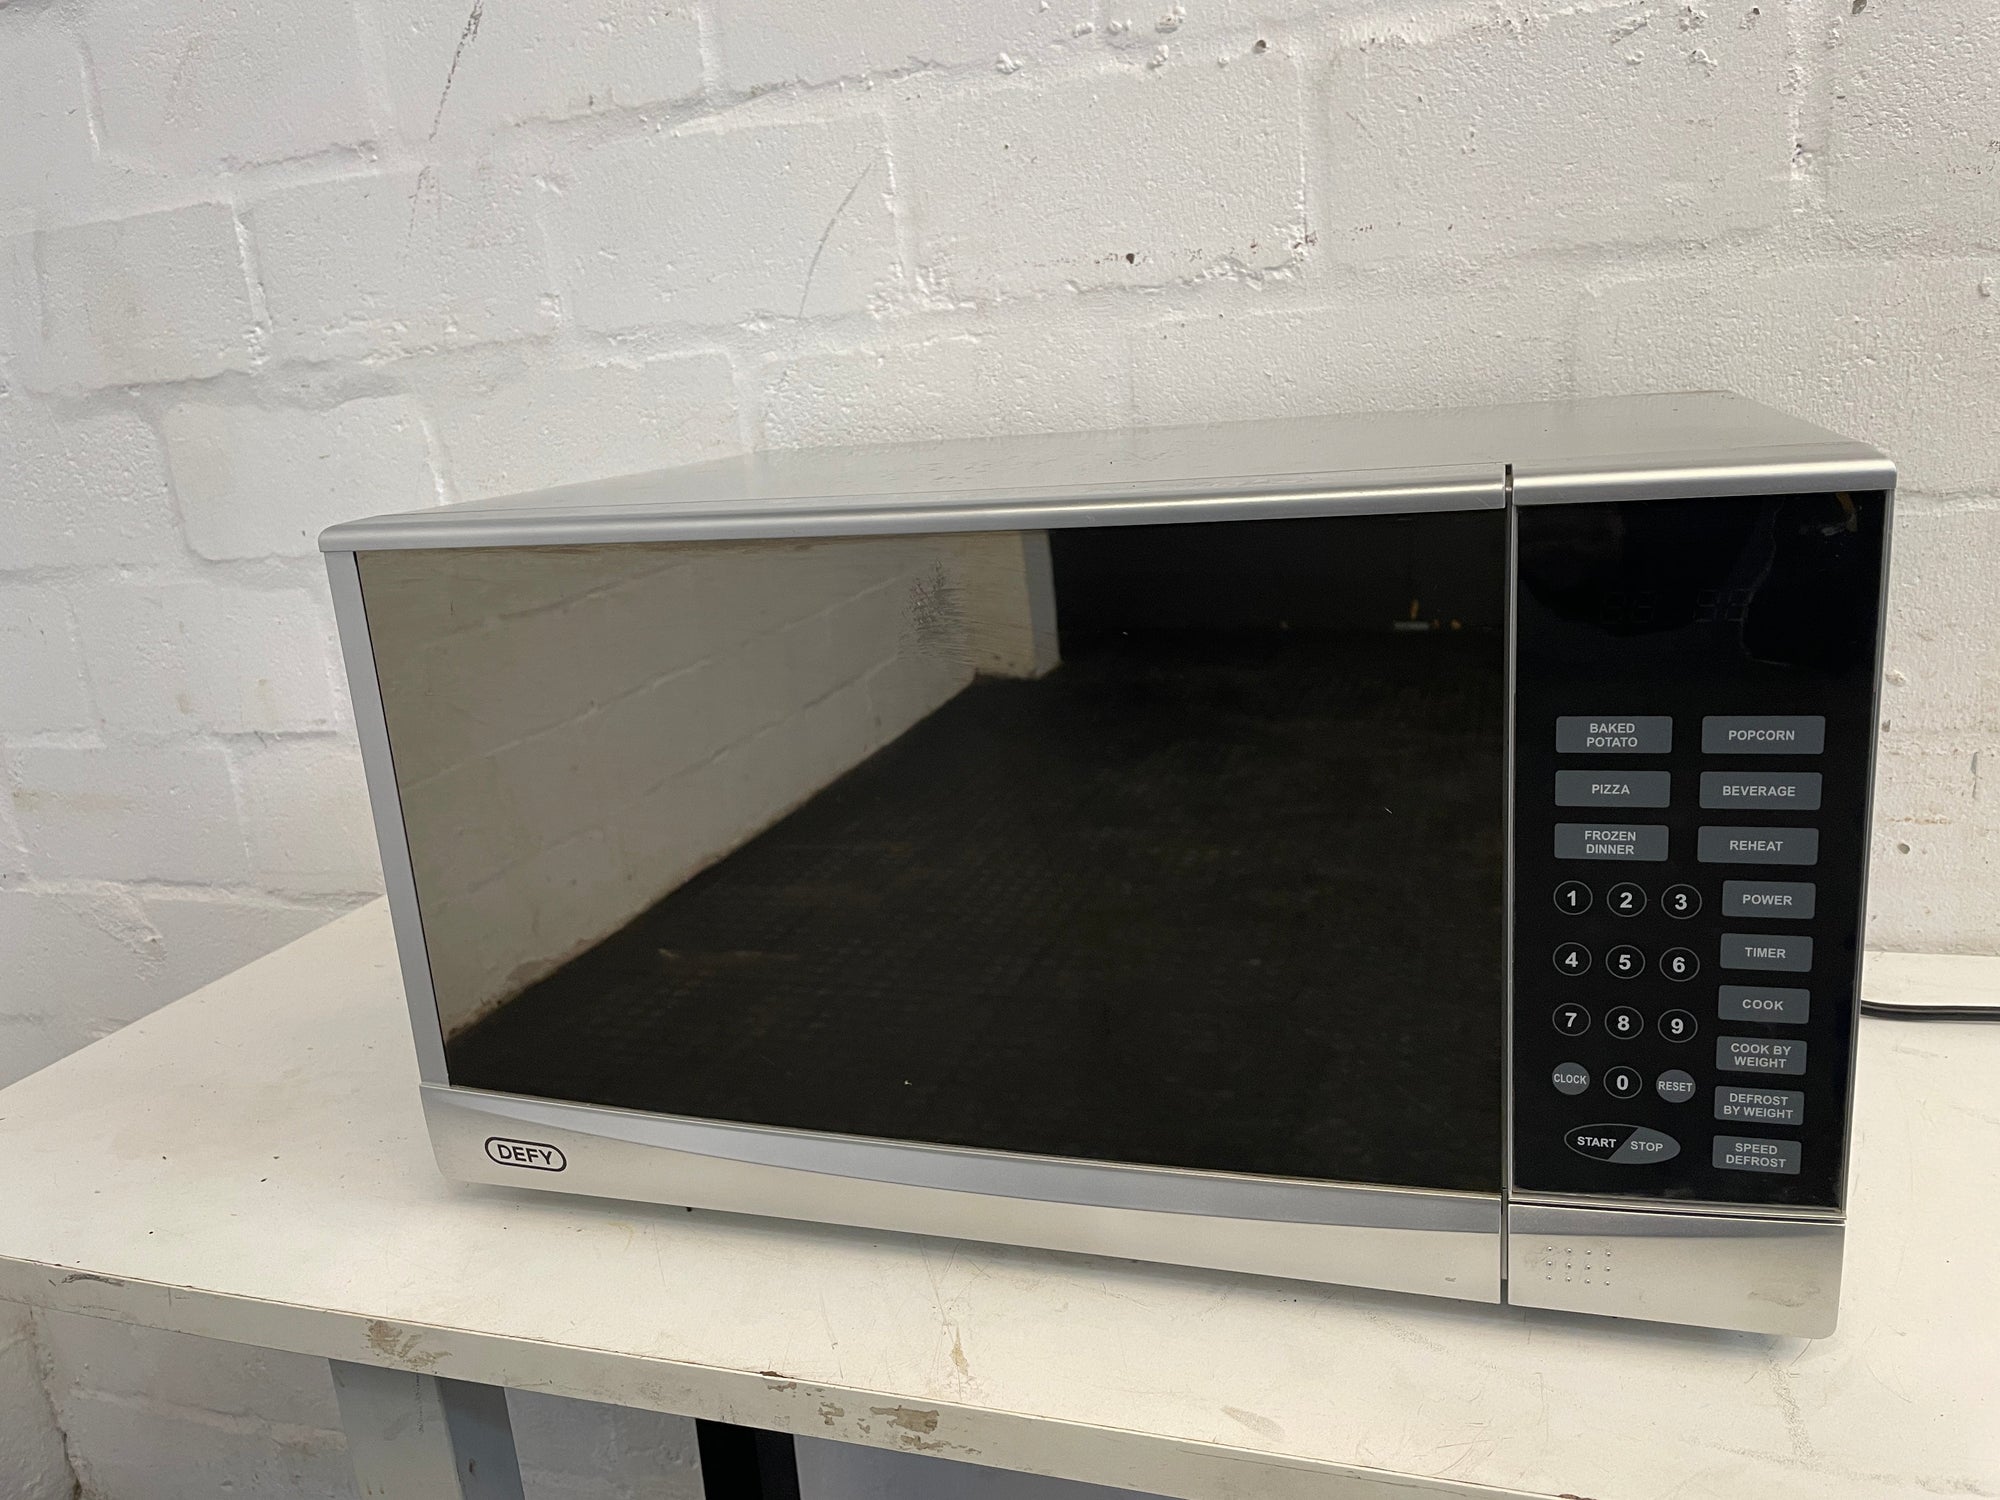 Defy Mirror Finish Microwave (Does not Work) - REDUCED